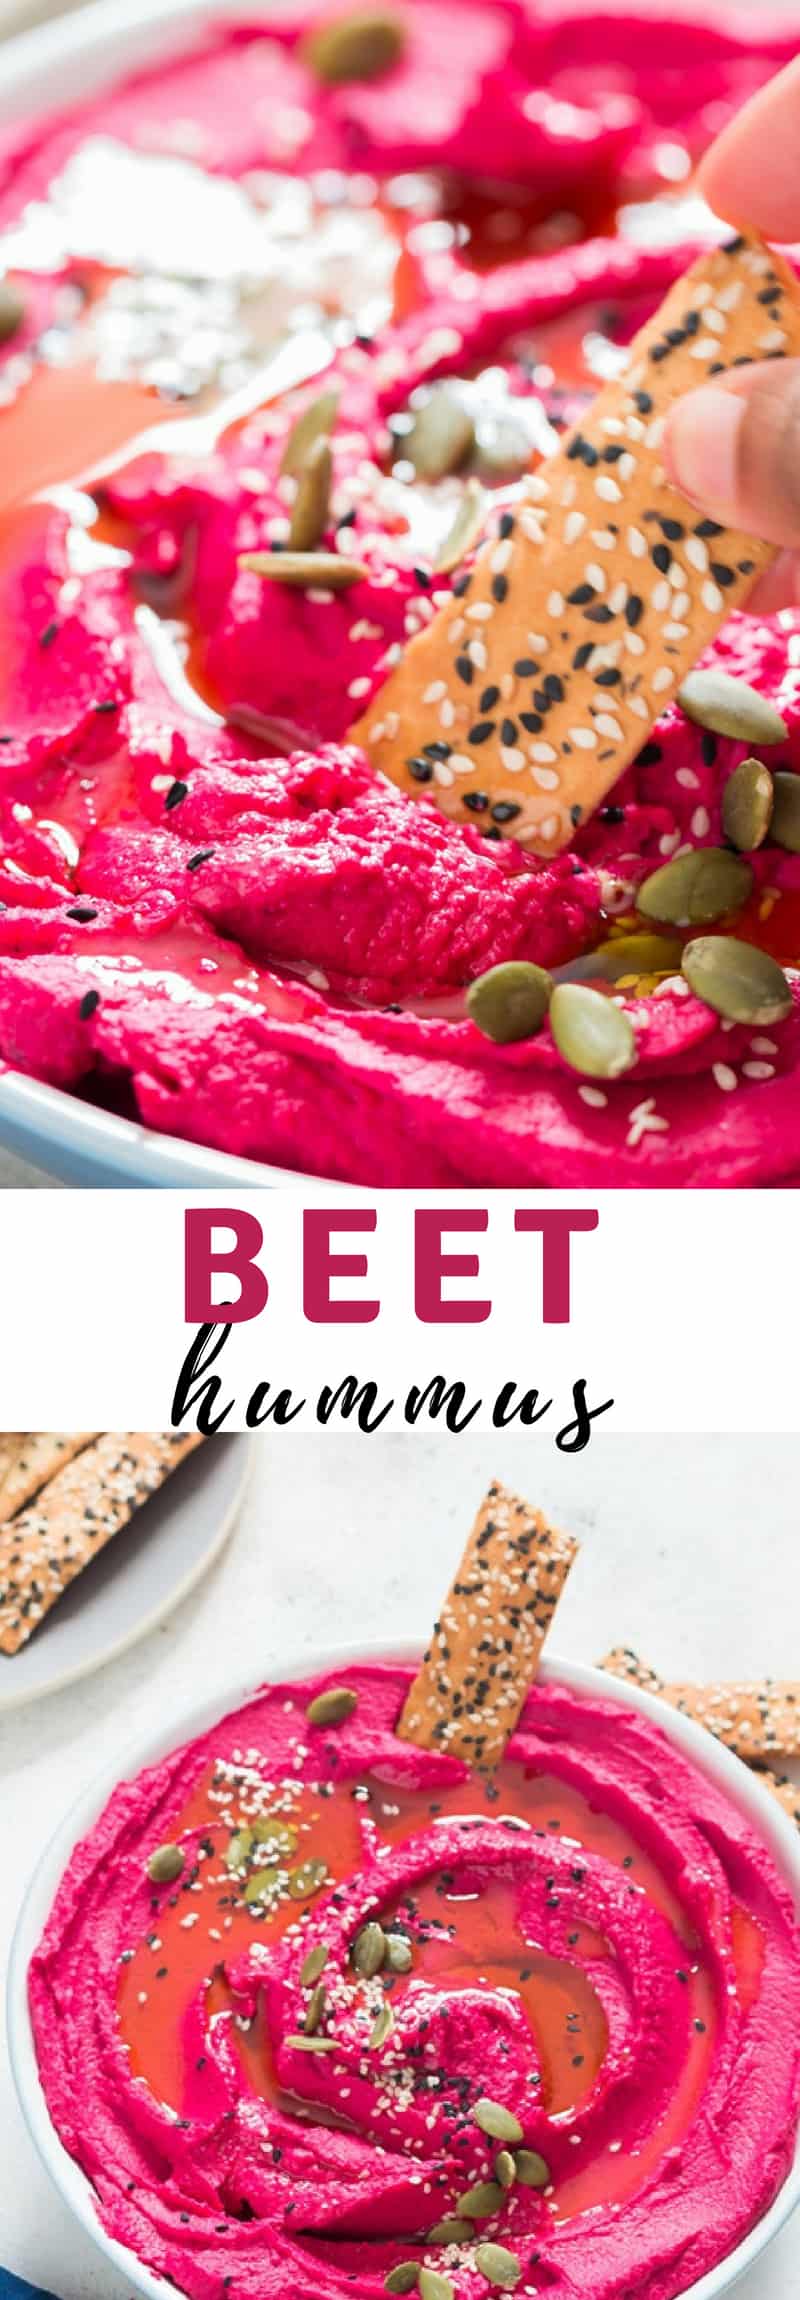 It takes 5 minutes to whip up a pink summery hummus, this is 5 minutes super creamy roasted beet hummus. We are in love with vibrant pink color of this roasted beet hummus. Beetroots adds slight sweet earthy flavors to the hummus with a burst of electric pink color, I’ve always been taken with the color! It’s excellent dip with raw veggies, chips, pita bread.